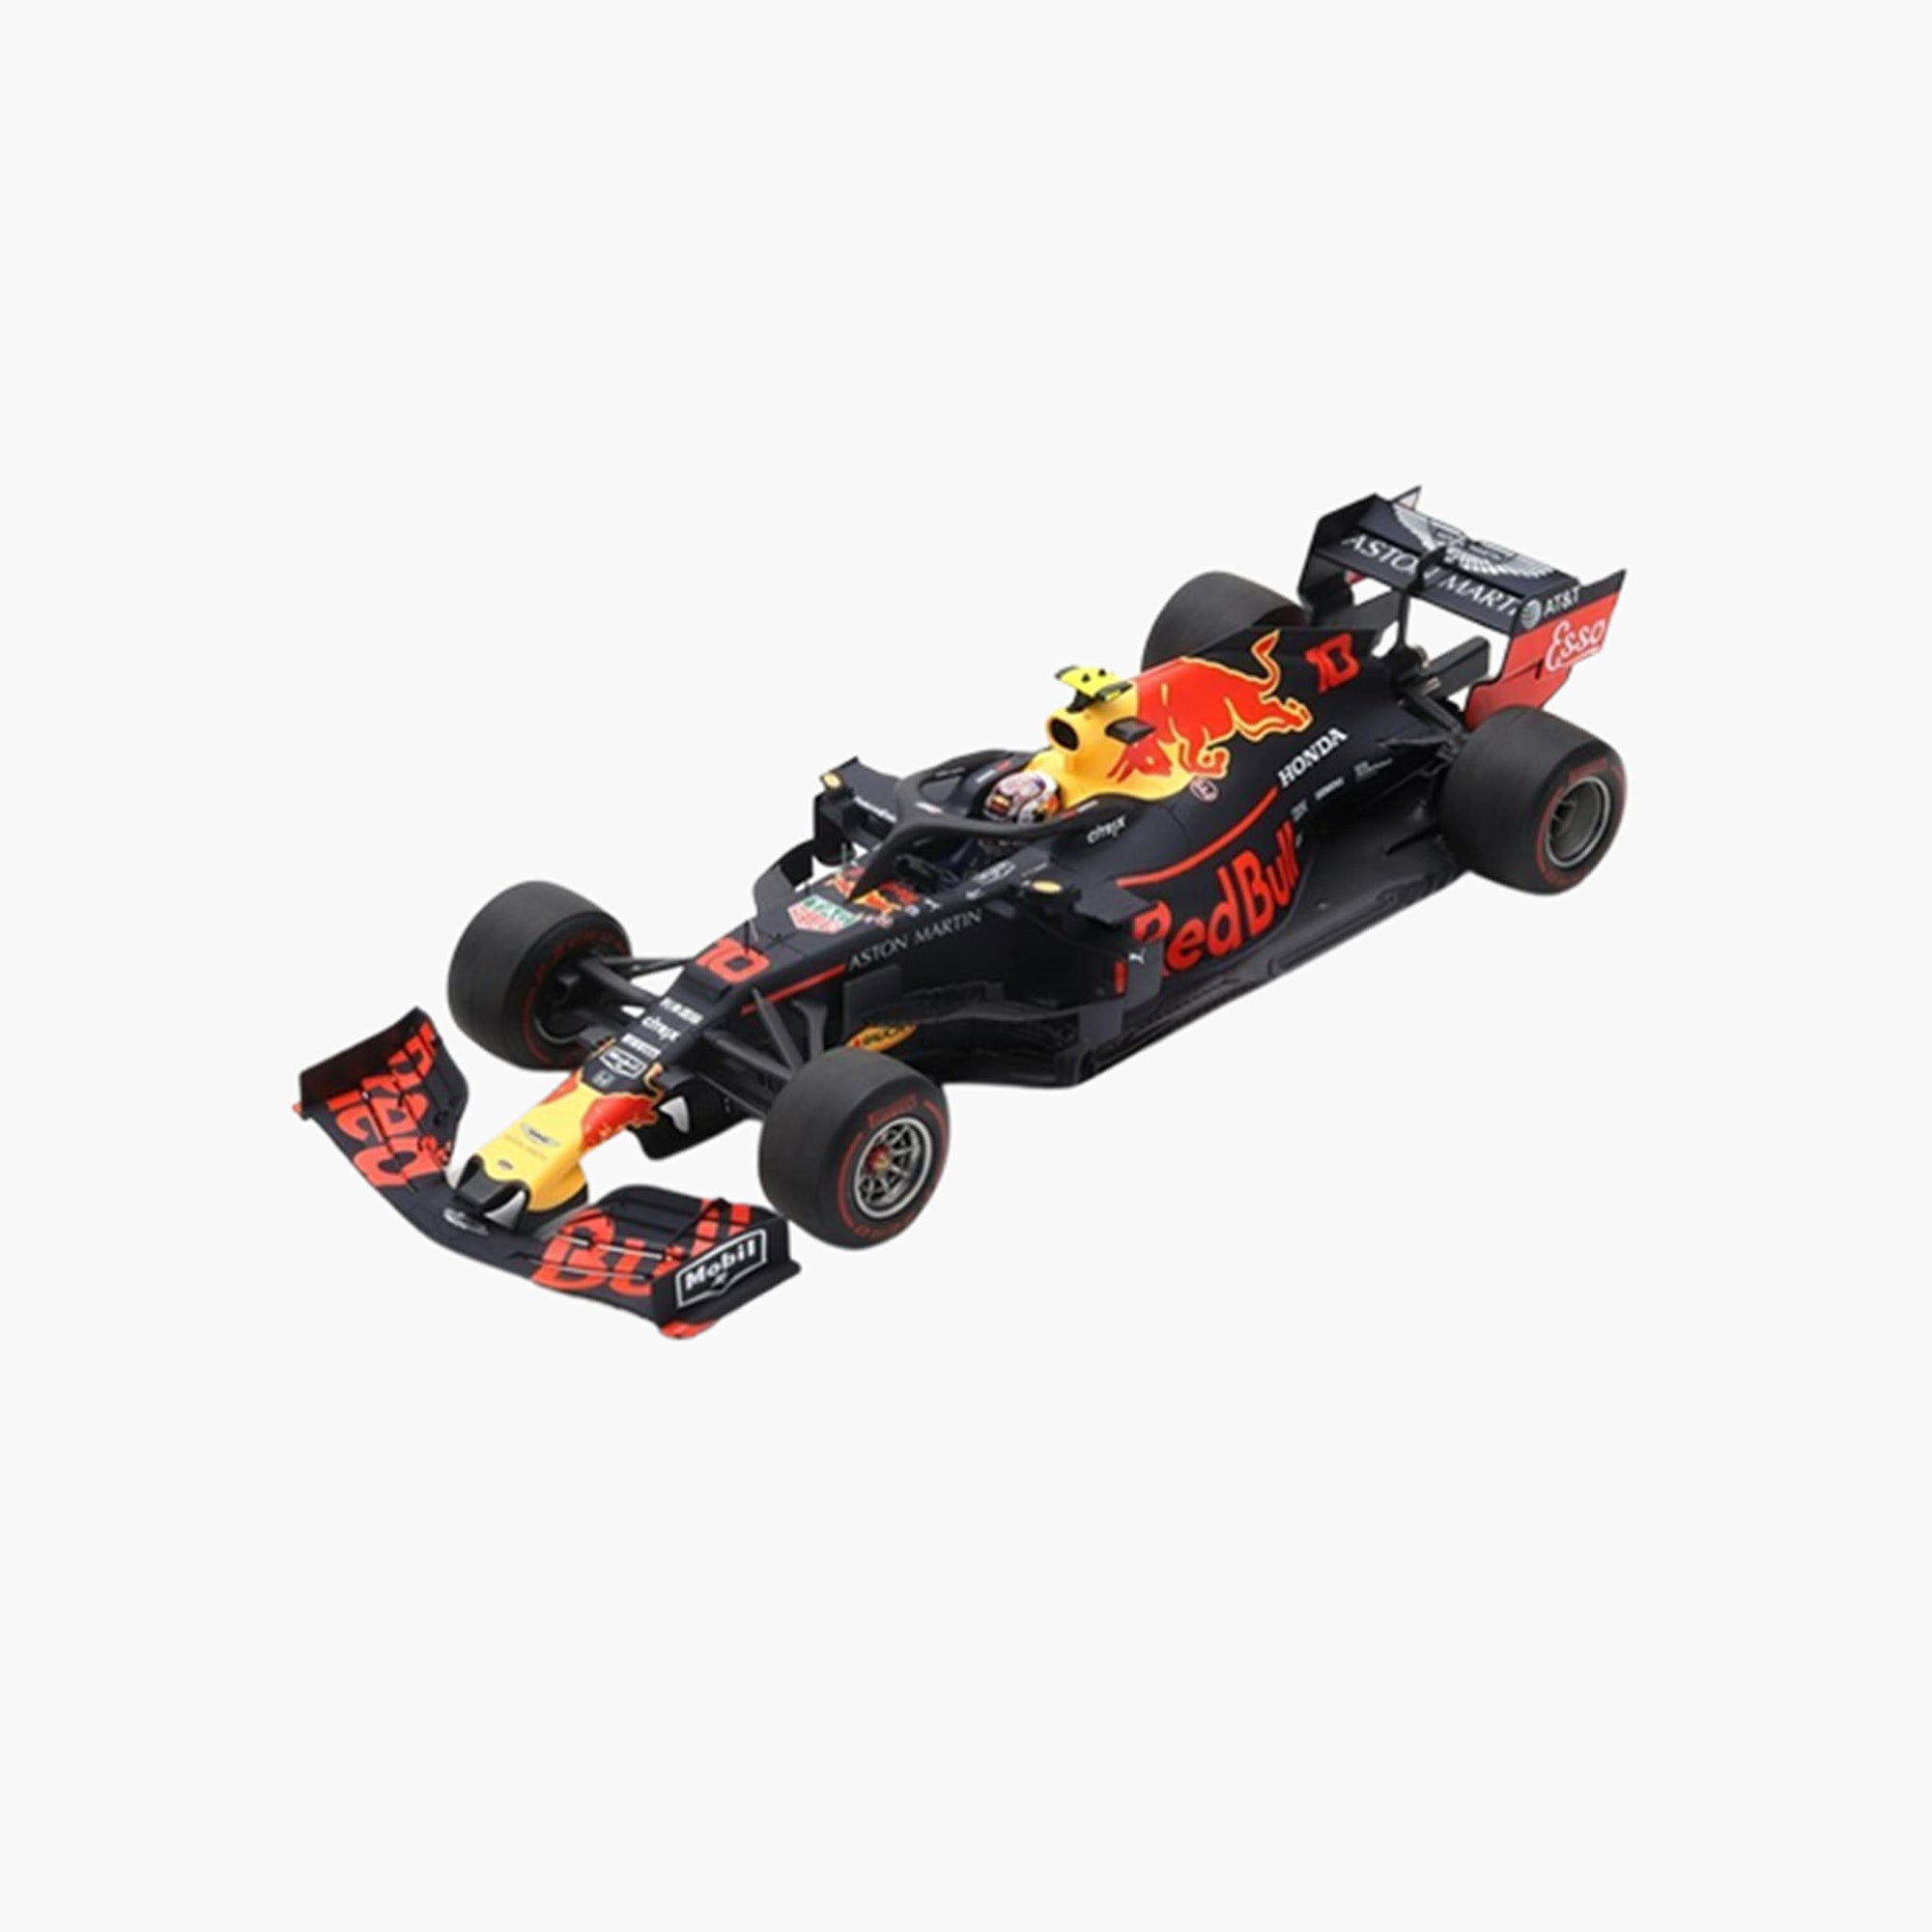 Aston Martin Red Bull Racing RB15 No.10 | 1:18 Scale Model-1:18 Scale Model-Spark Models-gpx-store